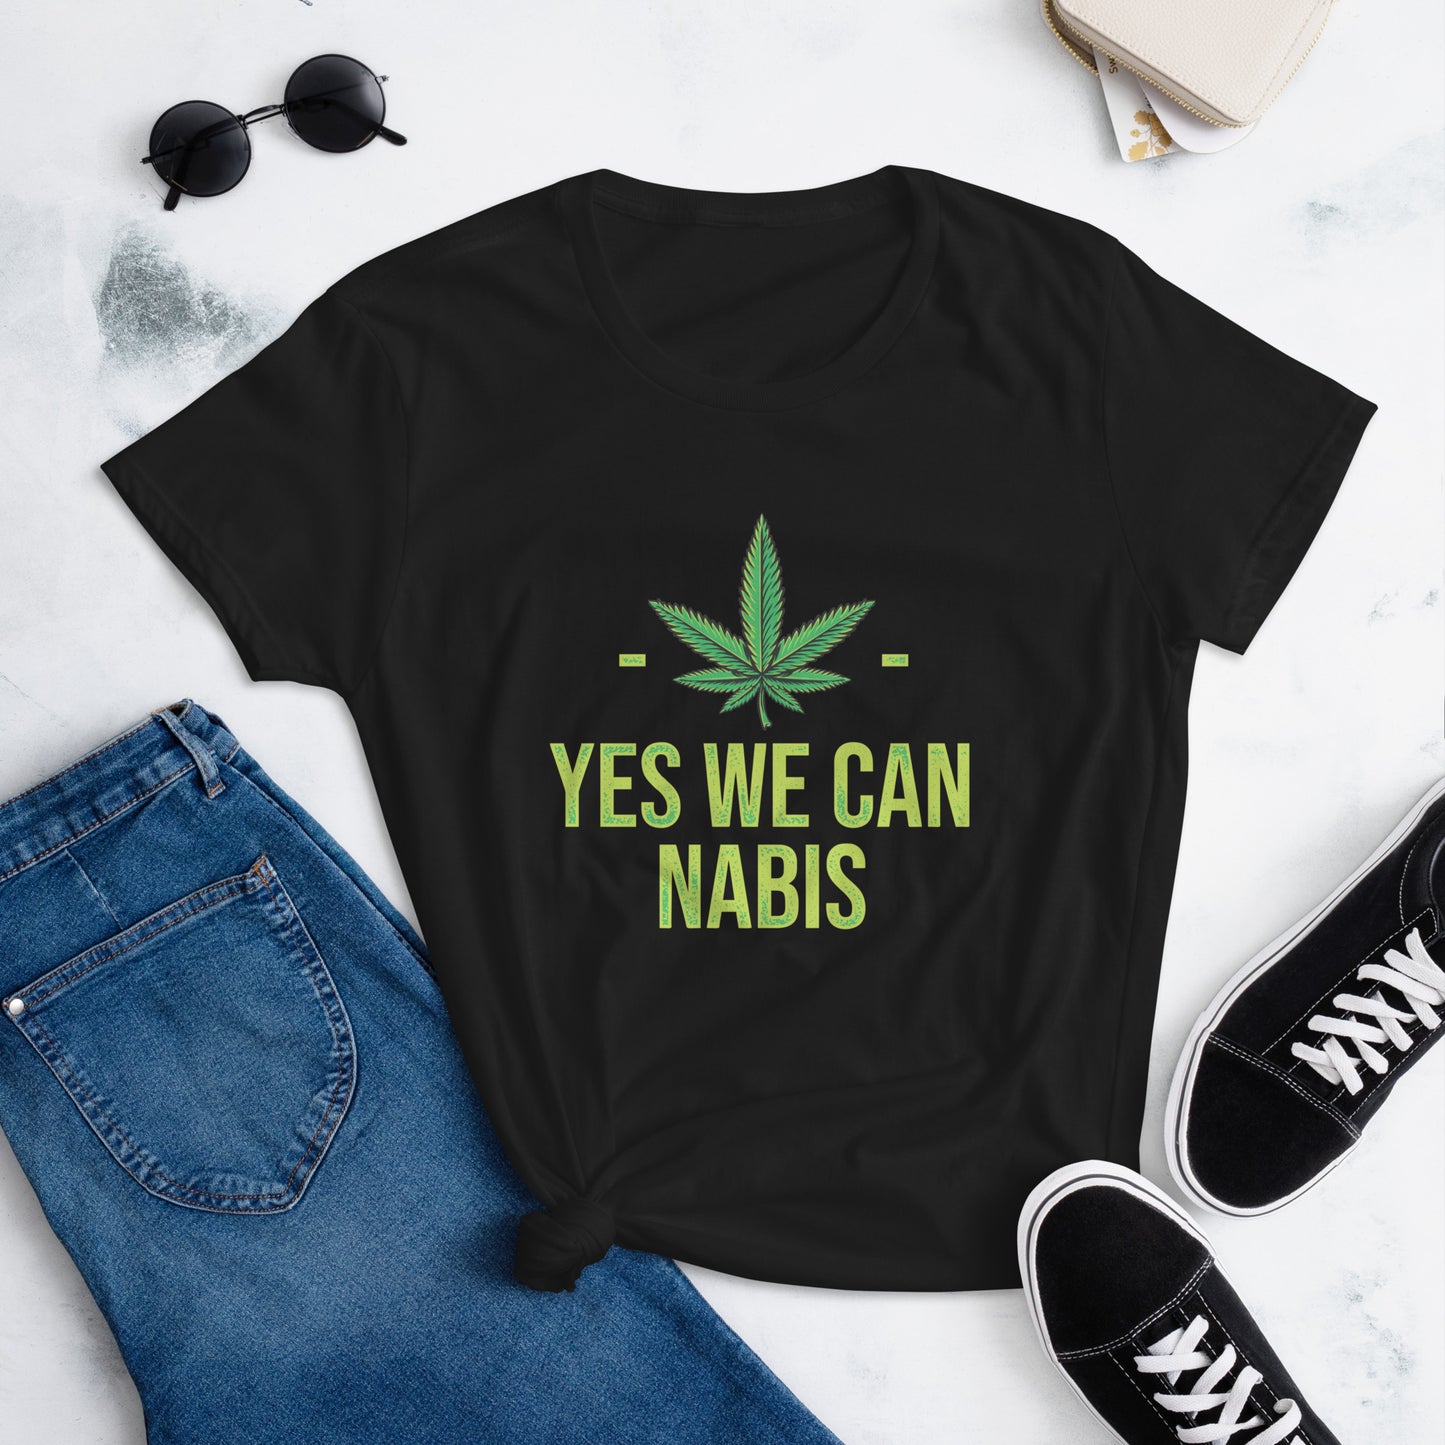 Yes we Can(nabis) - Women's T-Shirt | TheShirtfather